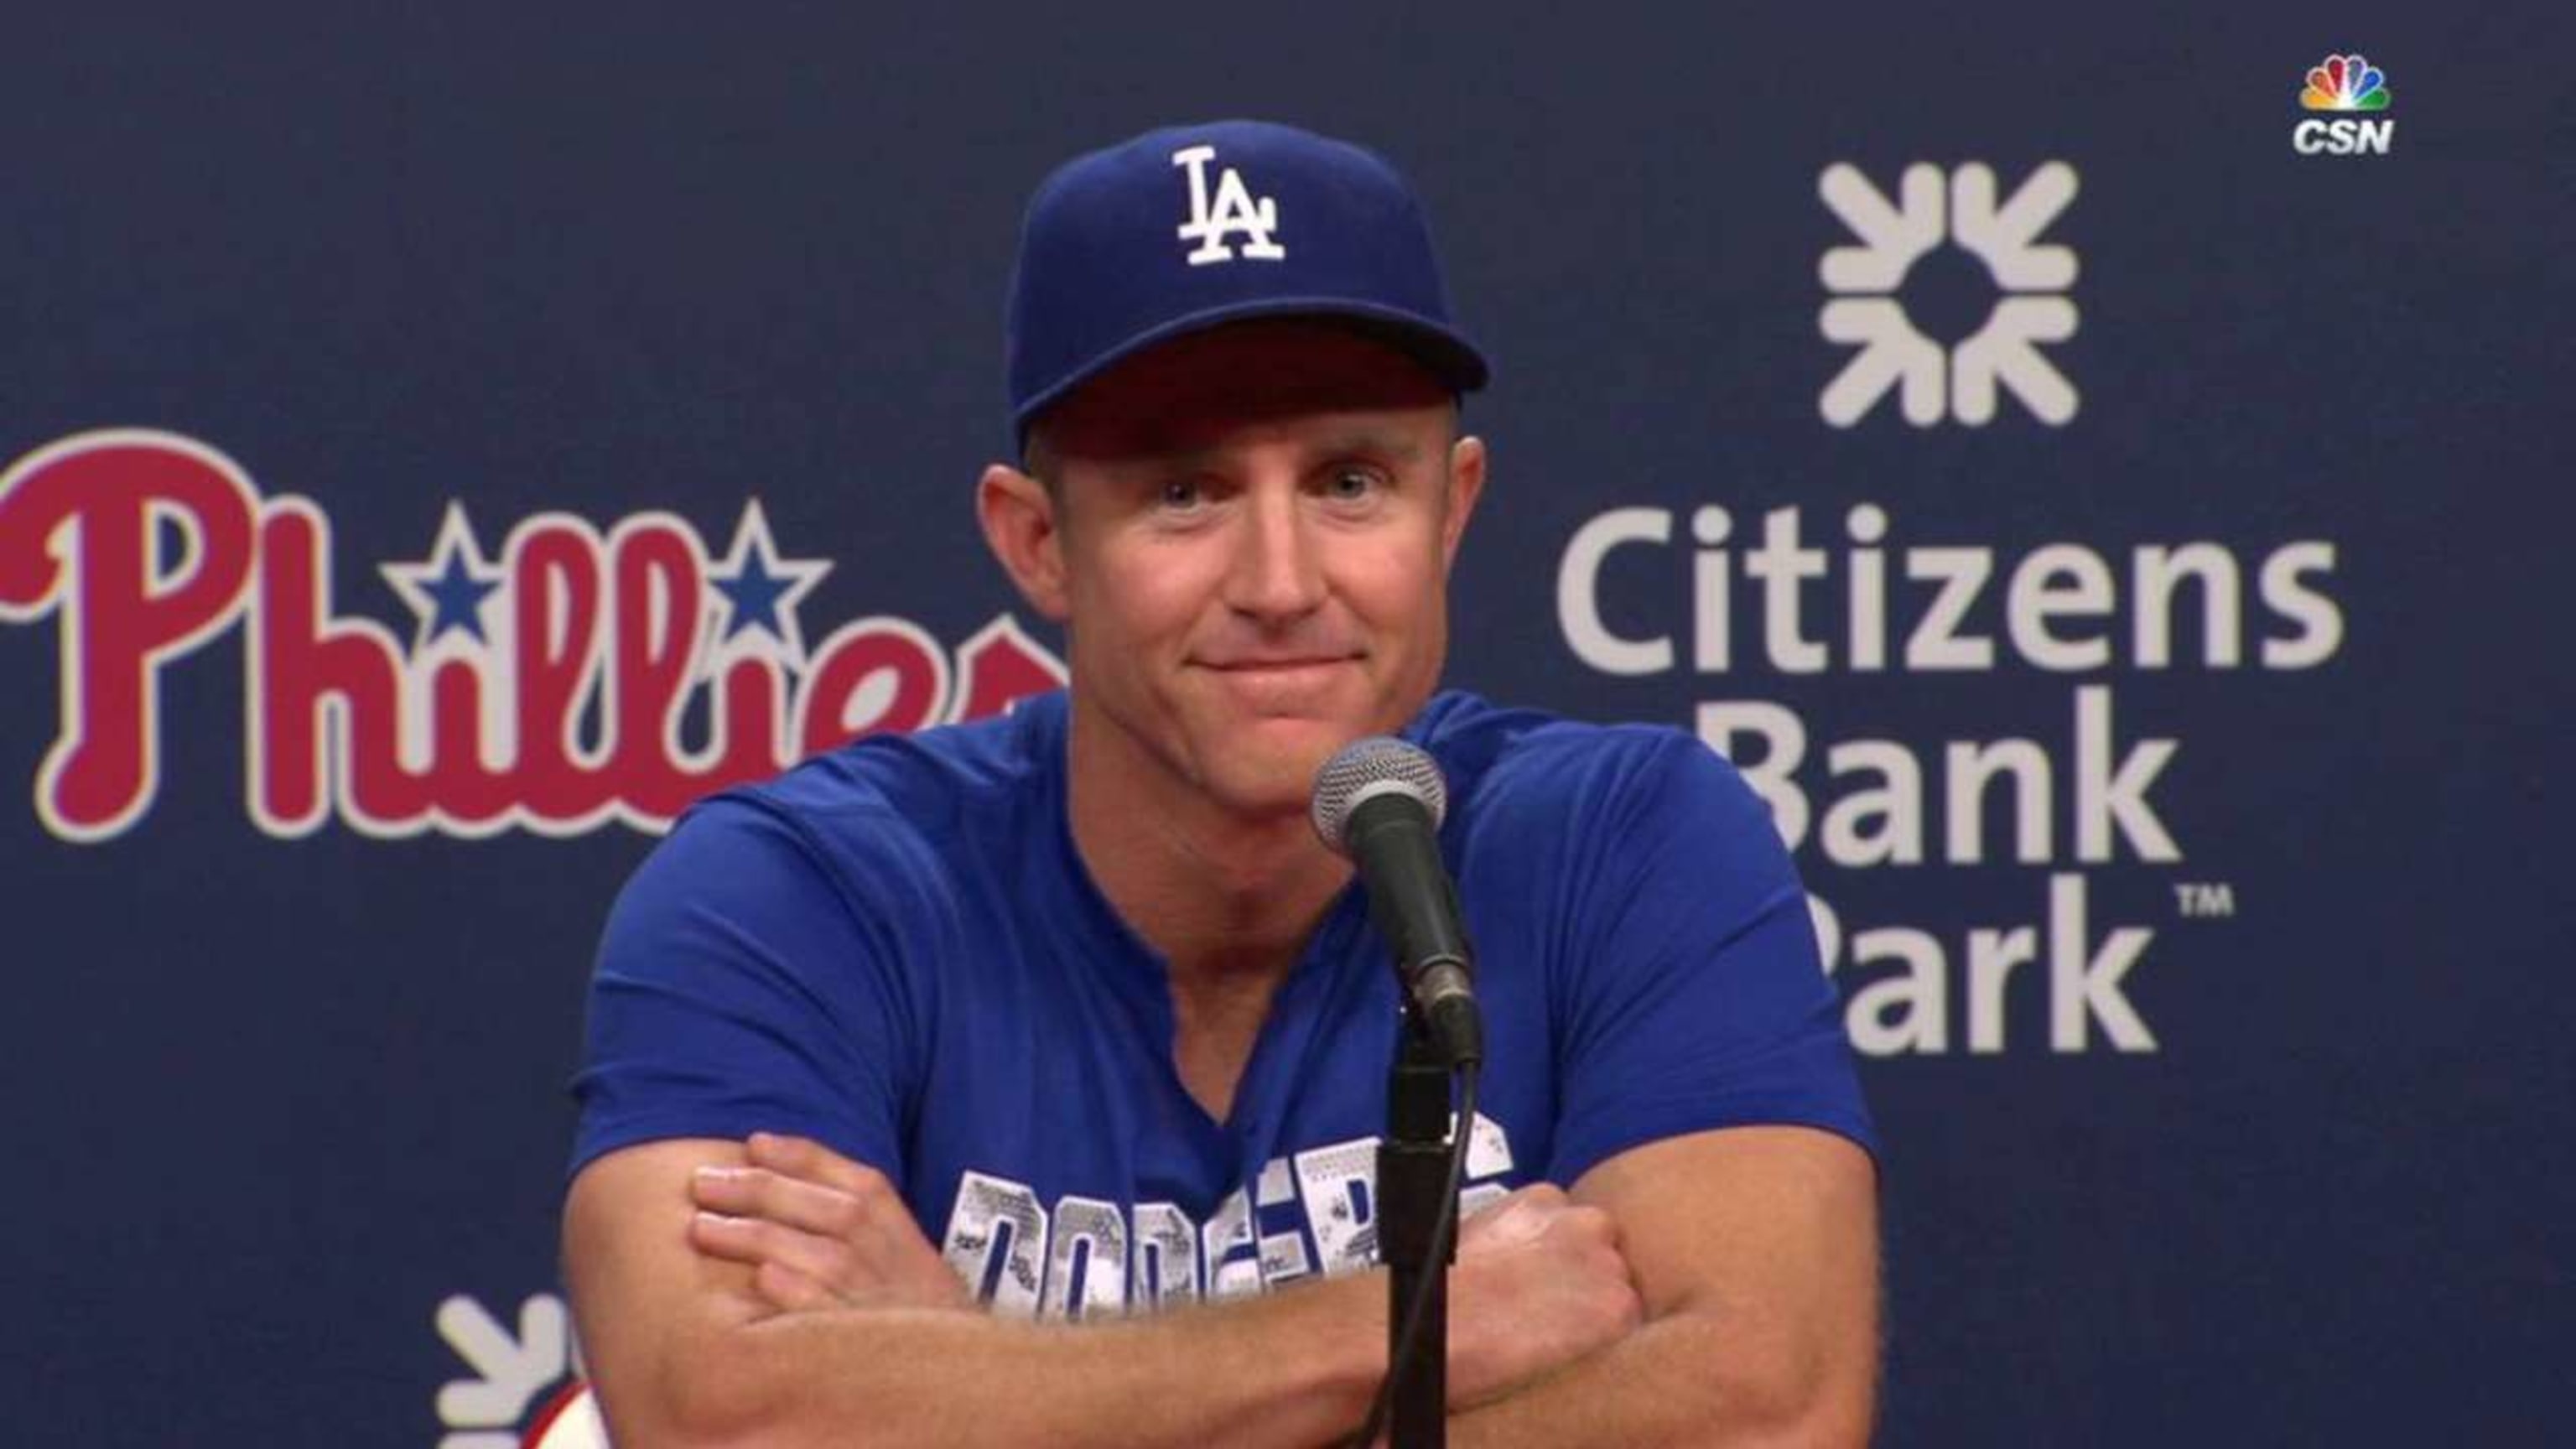 6abc Action News - THANK YOU CHASE UTLEY! The former Philadelphia Phillies  player has announced that he will retire at the end of the 2018 season. ⚾️